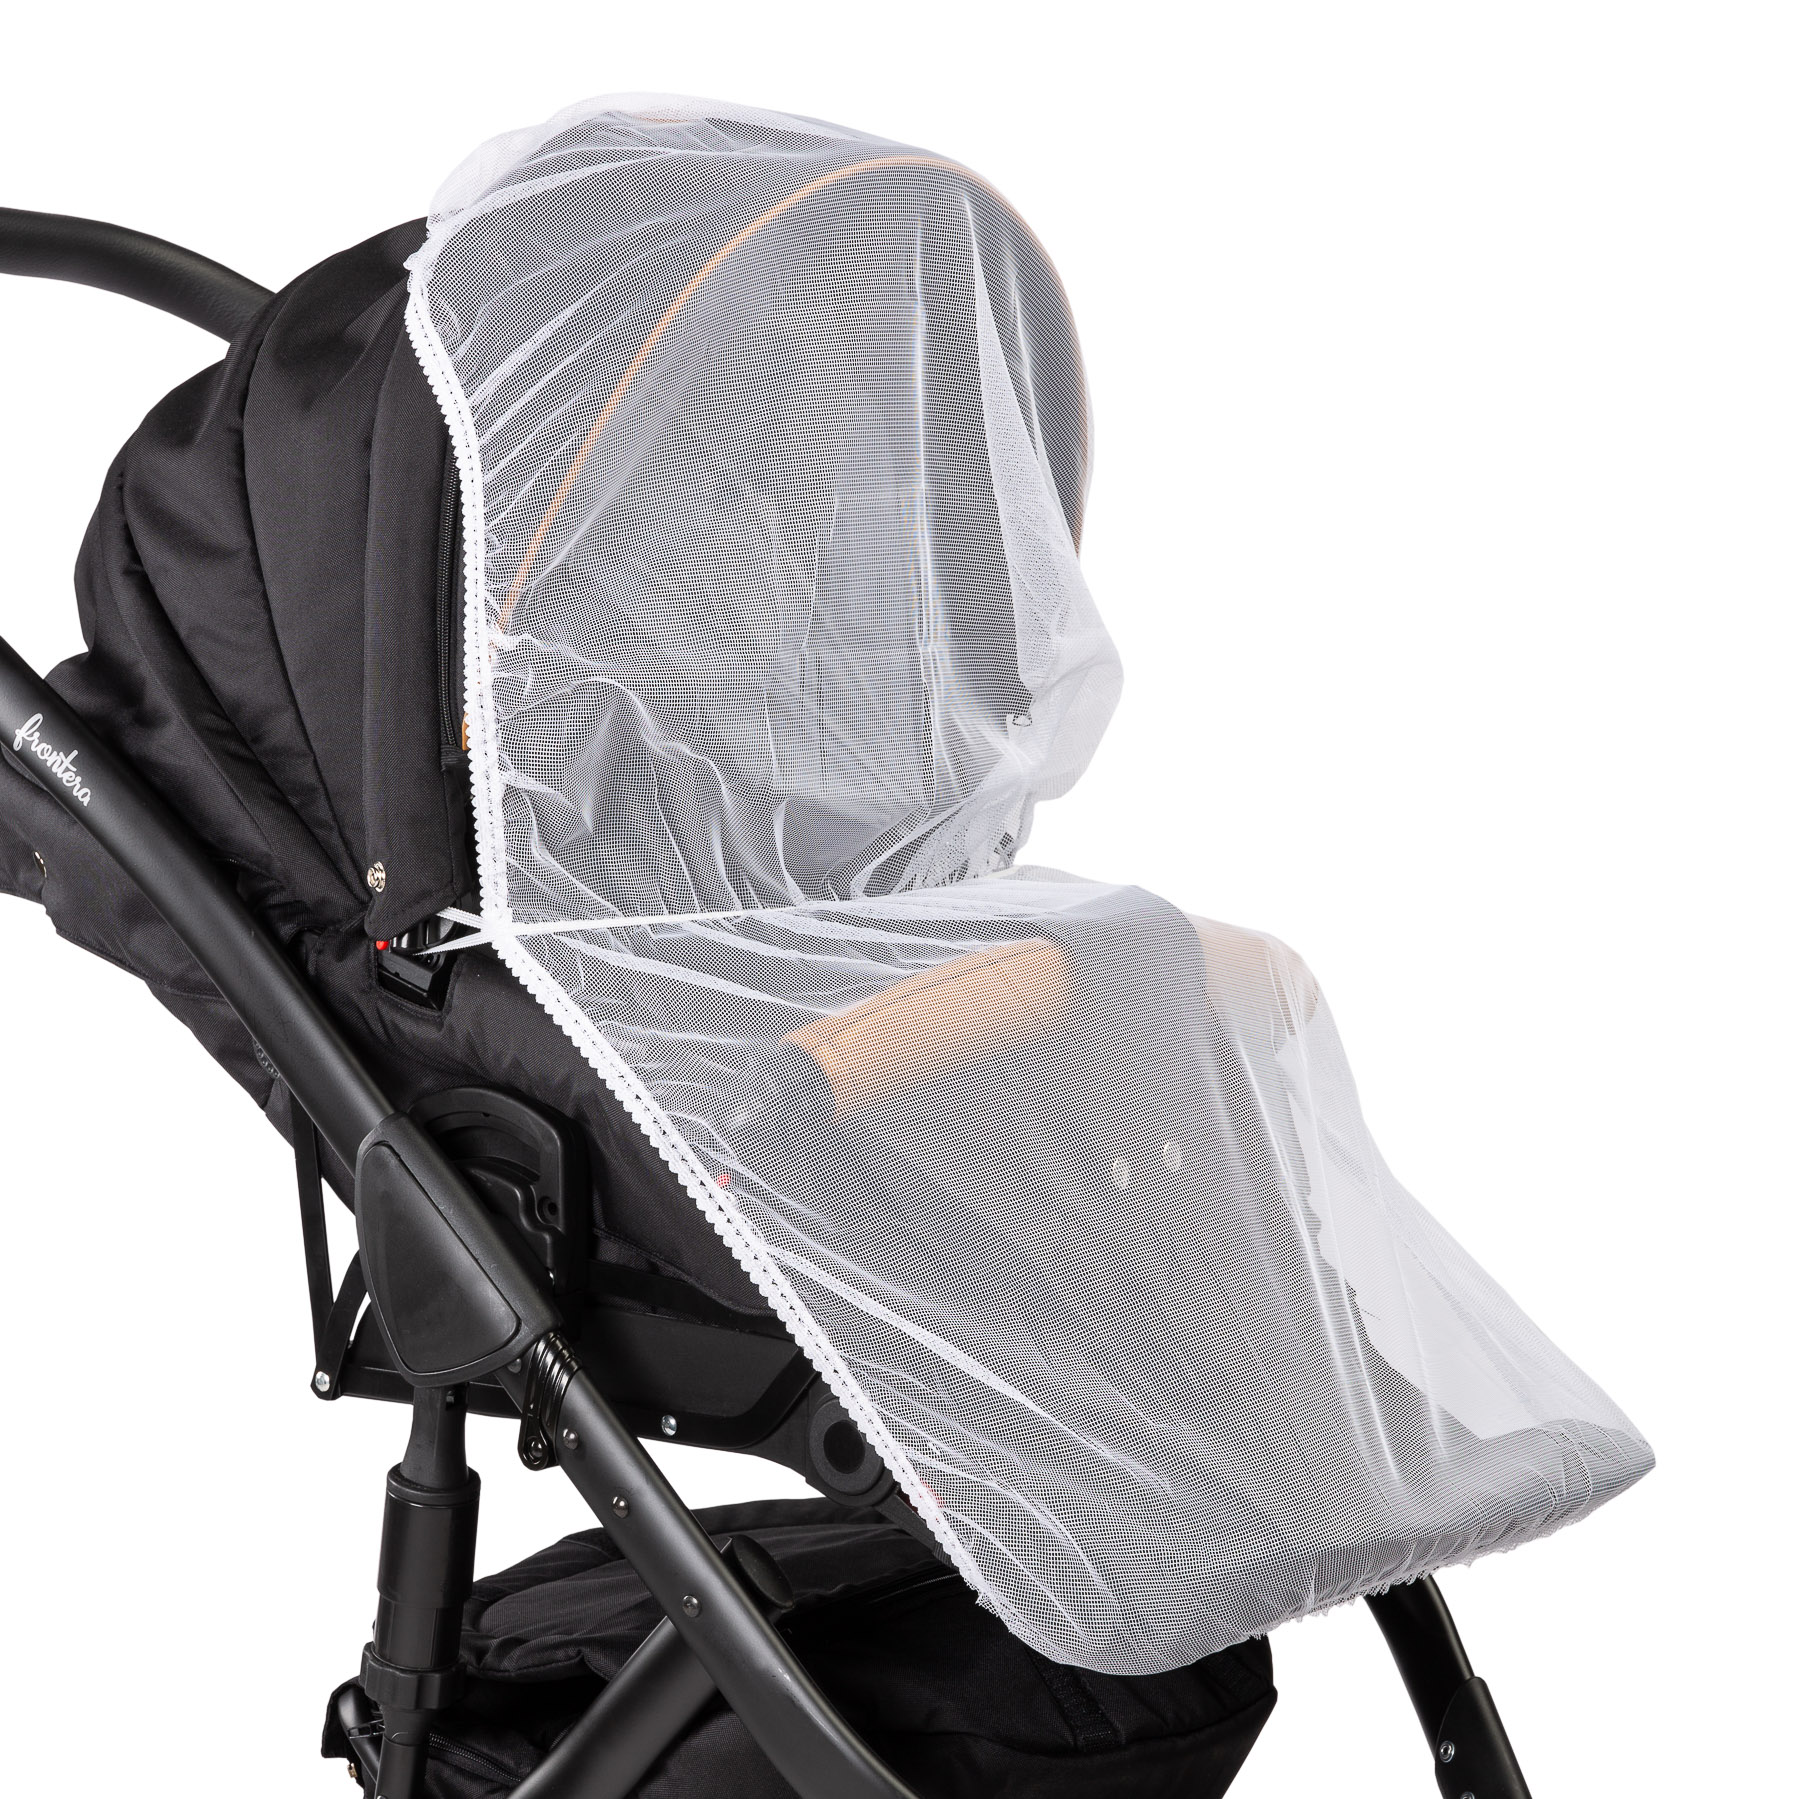 Universal mosquito net for strollers